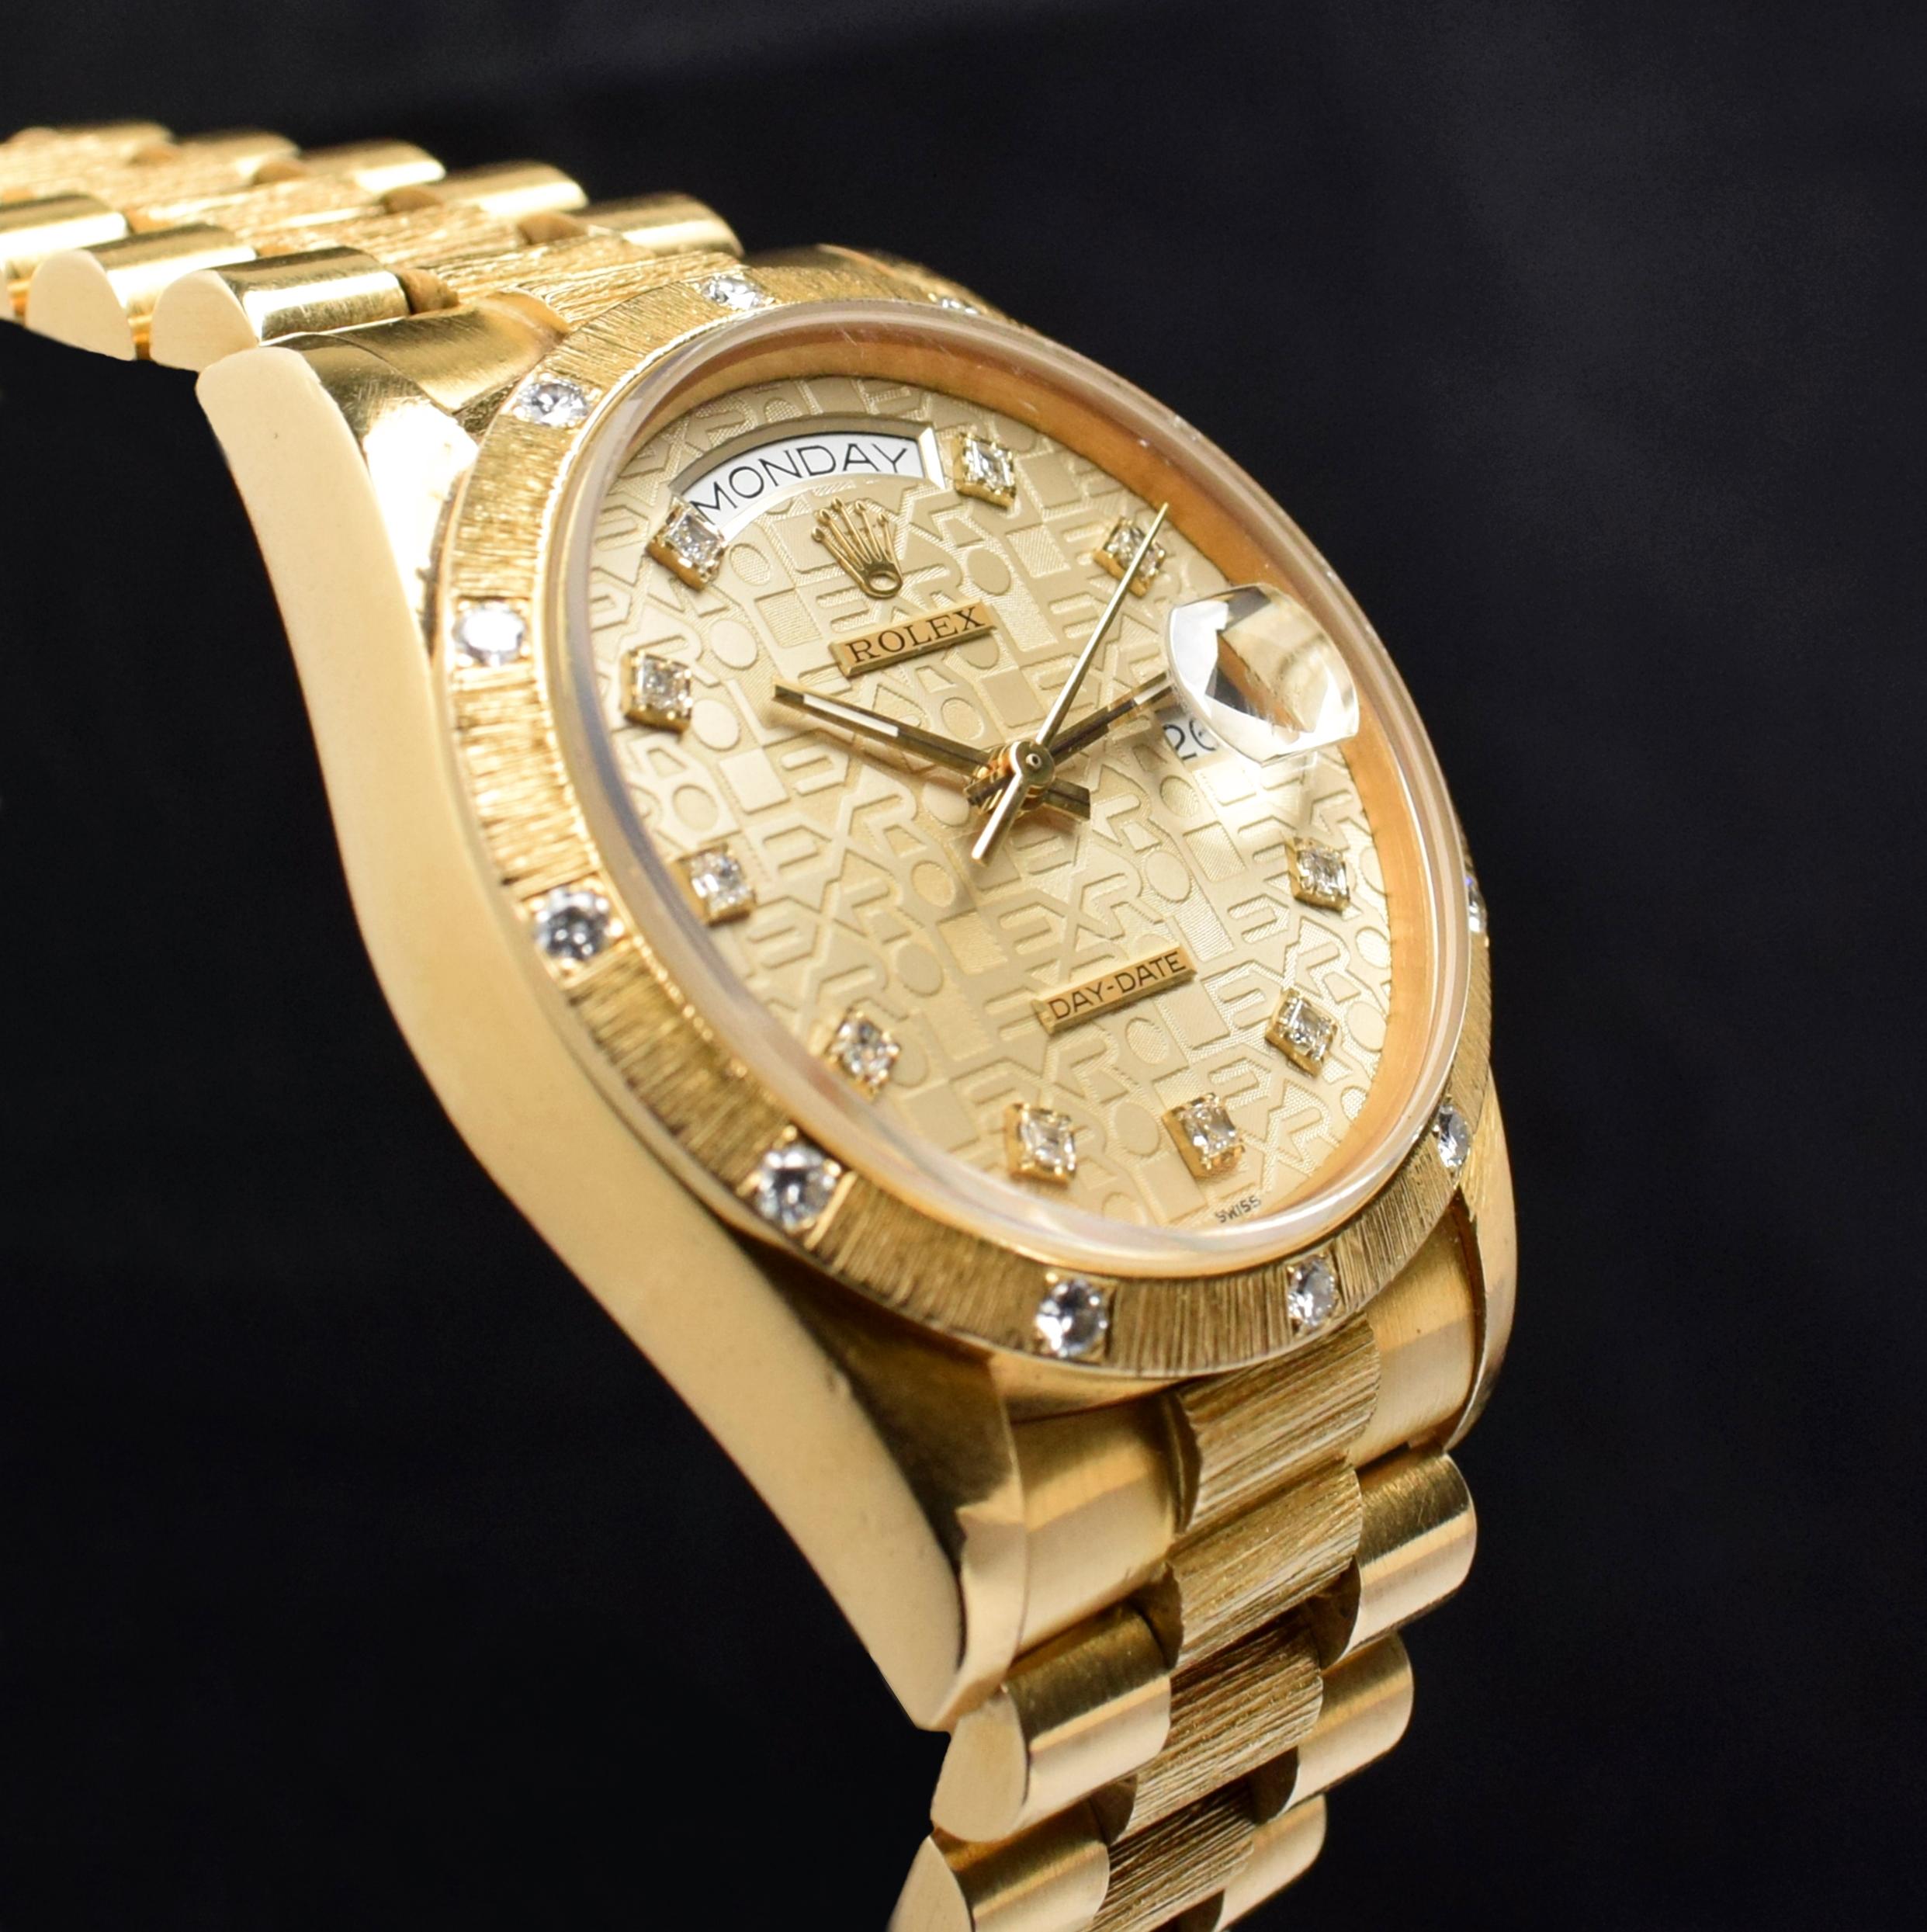 Square Cut Rolex Day-Date 18K Yellow Gold Bark Jubilee Anniversary 18108 Watch & Paper 1986